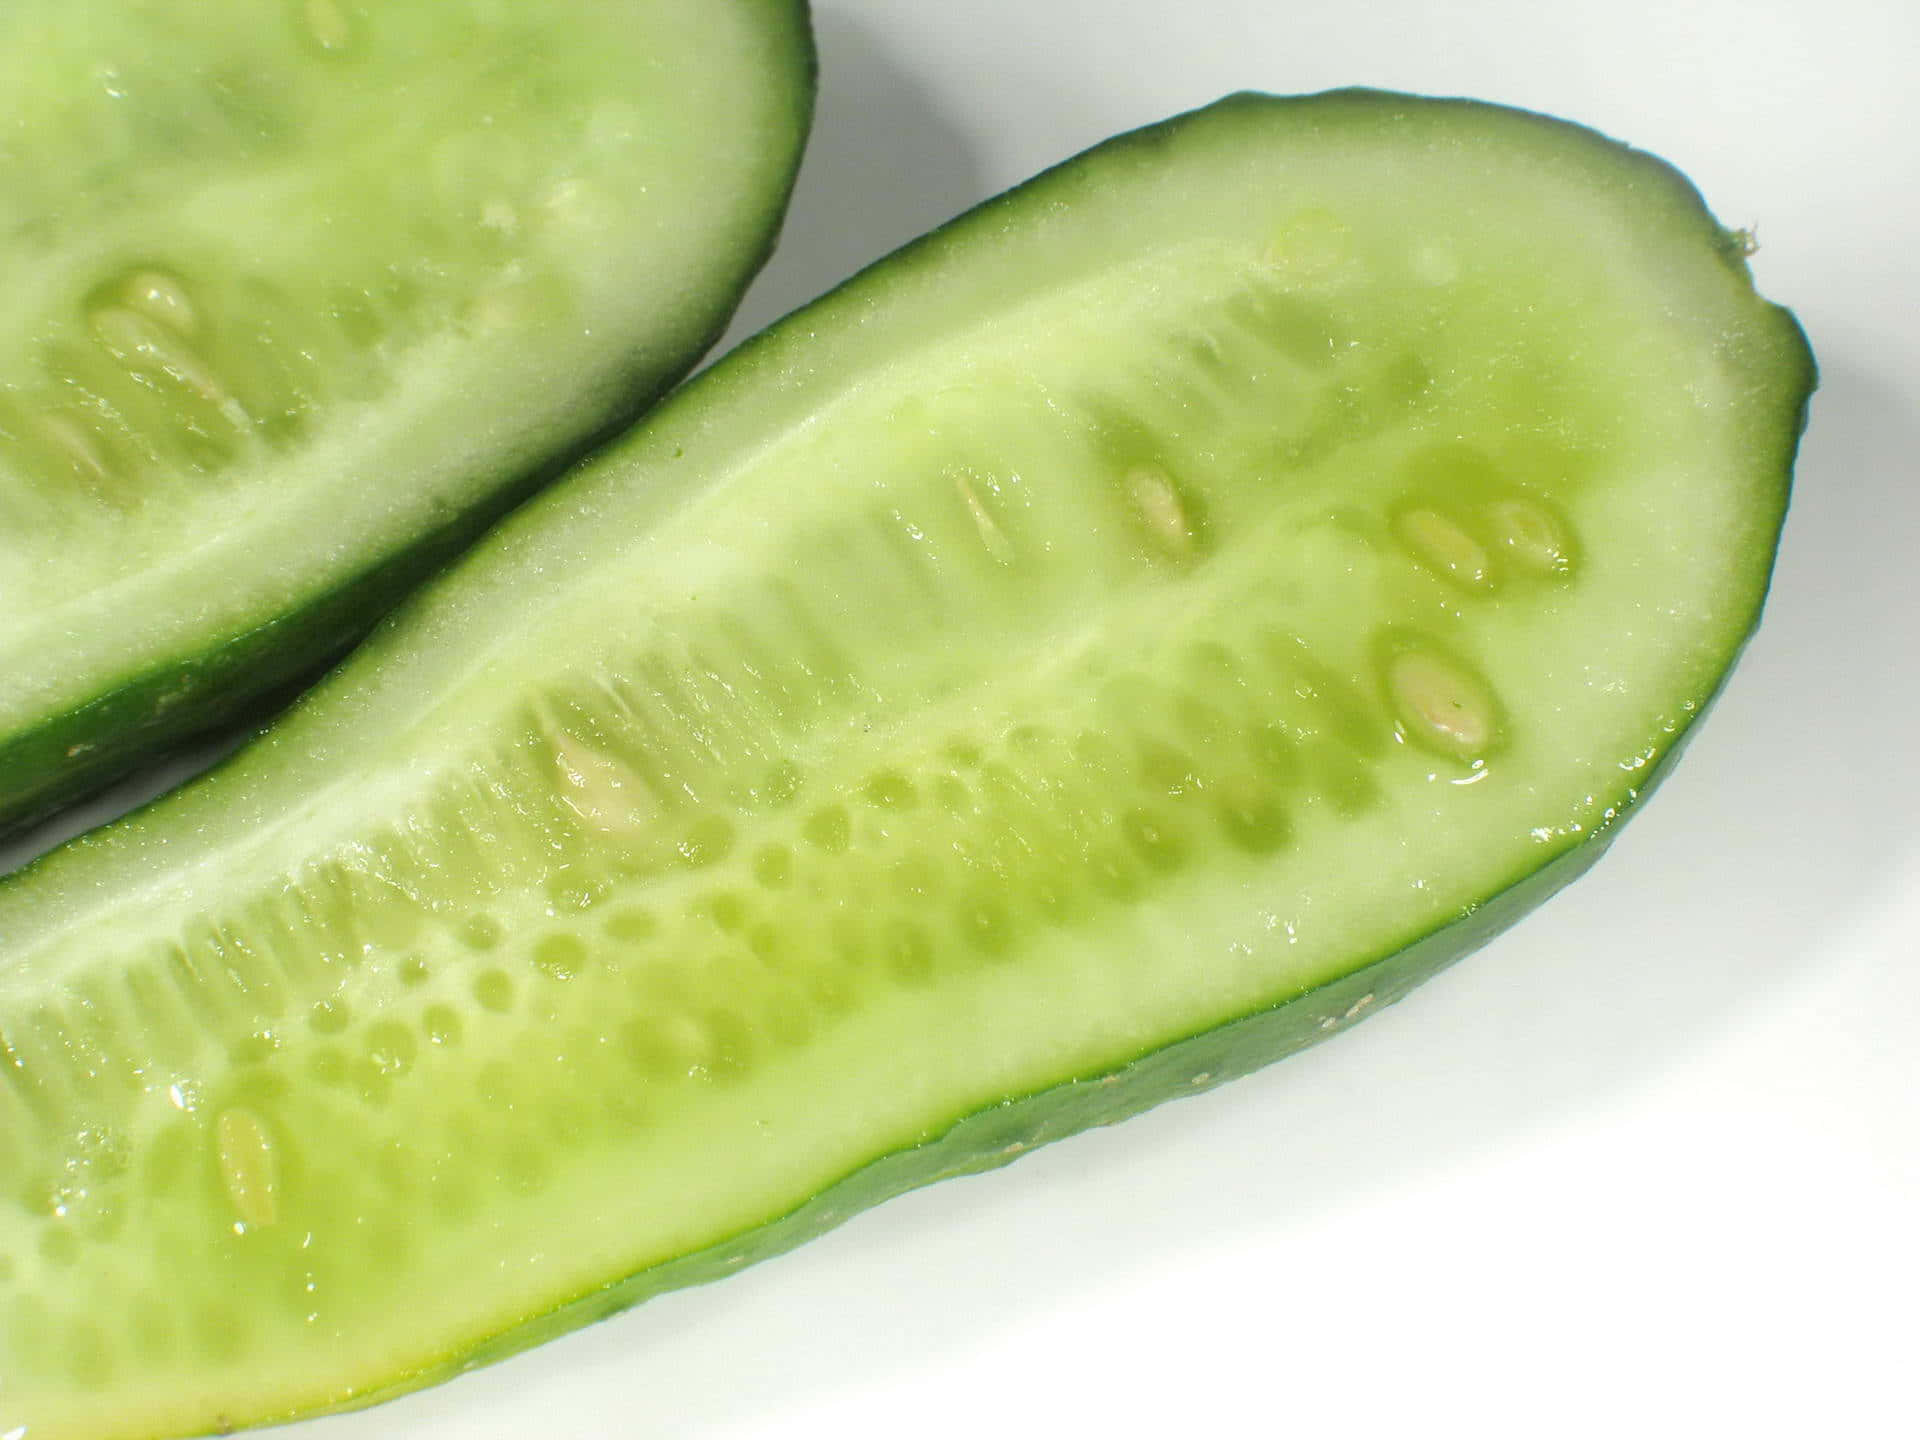 Two Cucumbers Are Cut In Half